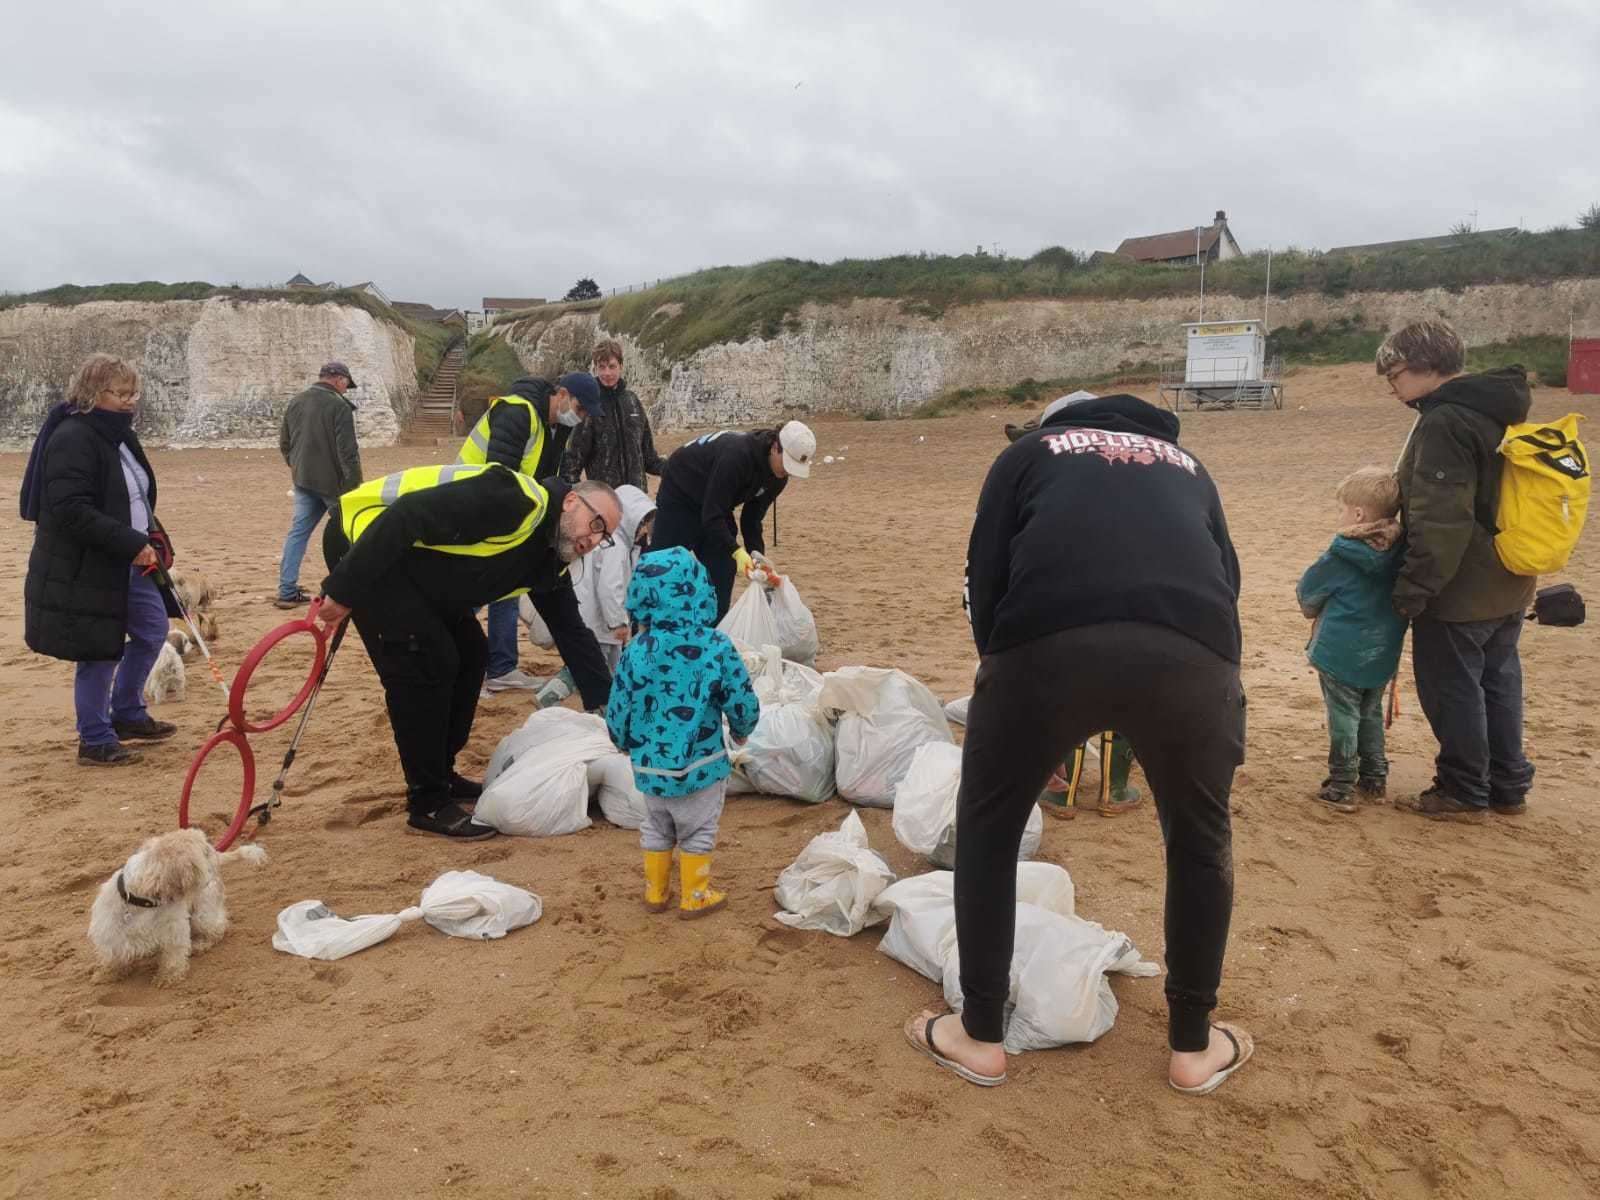 Hard-working volunteers from the Friends of Botany Bay and Kingsgate Group